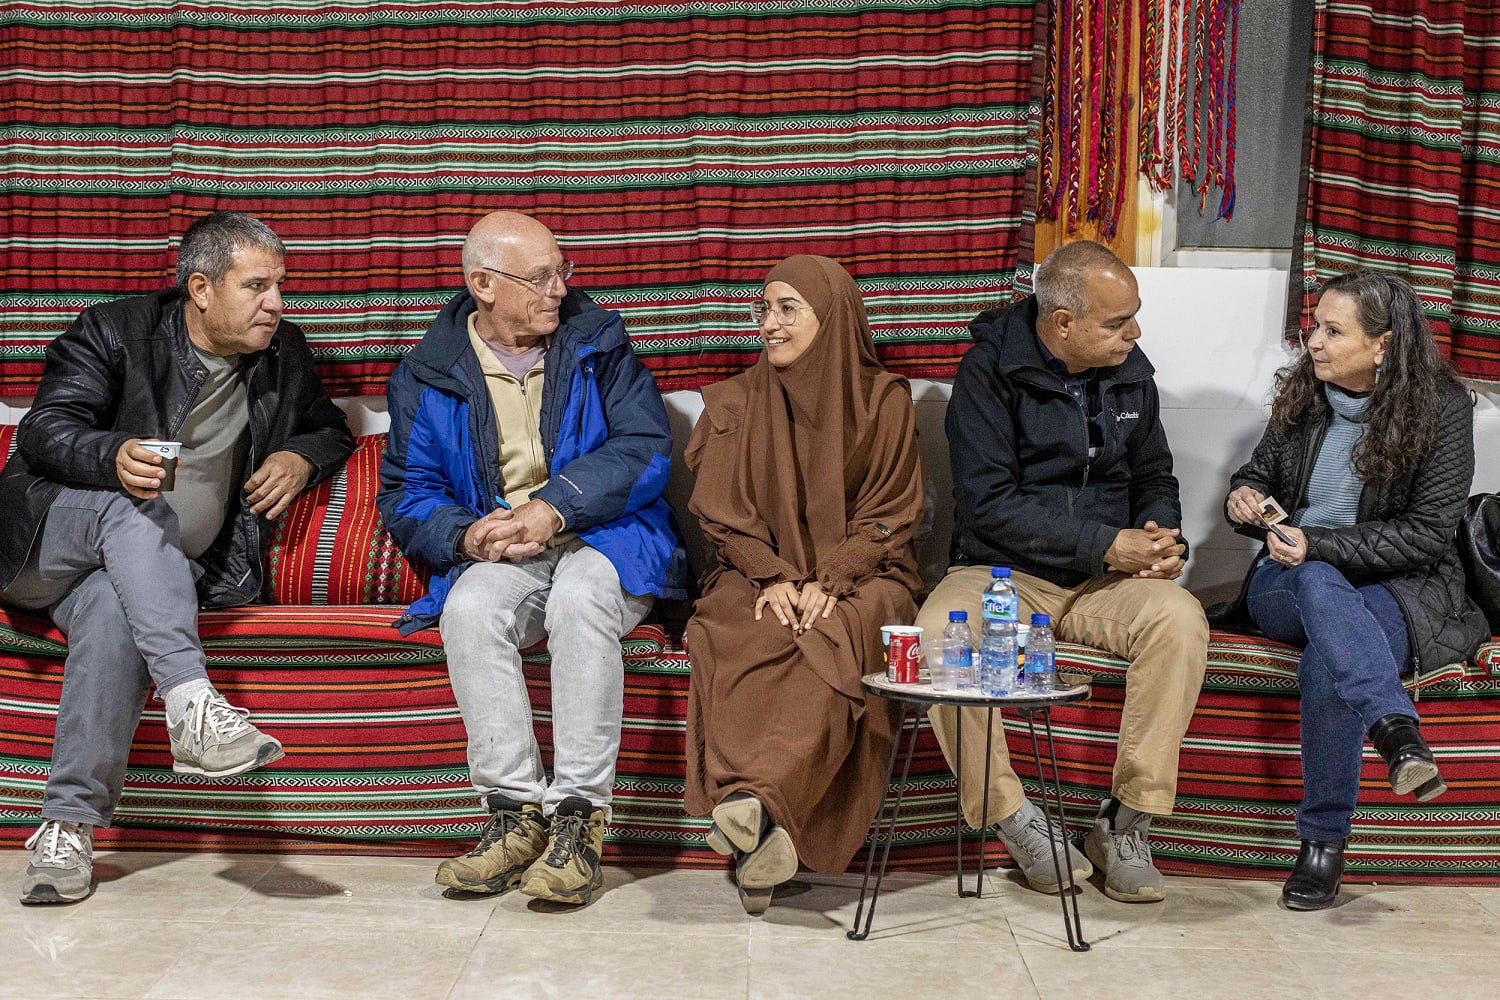 at a ramadan meal, palestinian bedouin invite jewish israelis to the table